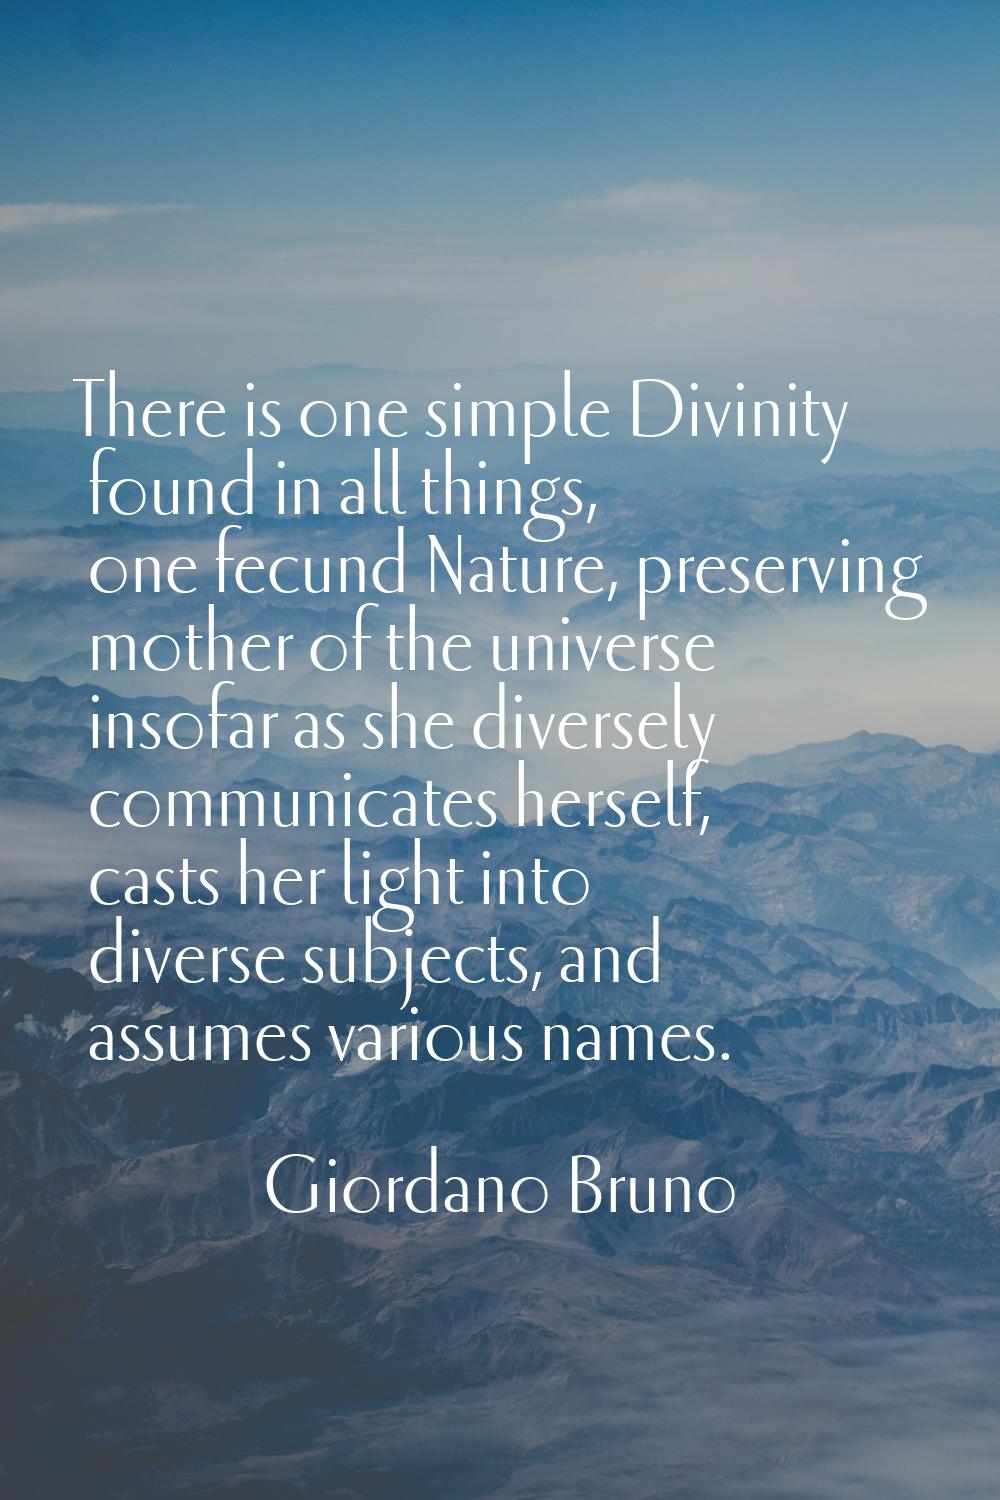 There is one simple Divinity found in all things, one fecund Nature, preserving mother of the unive